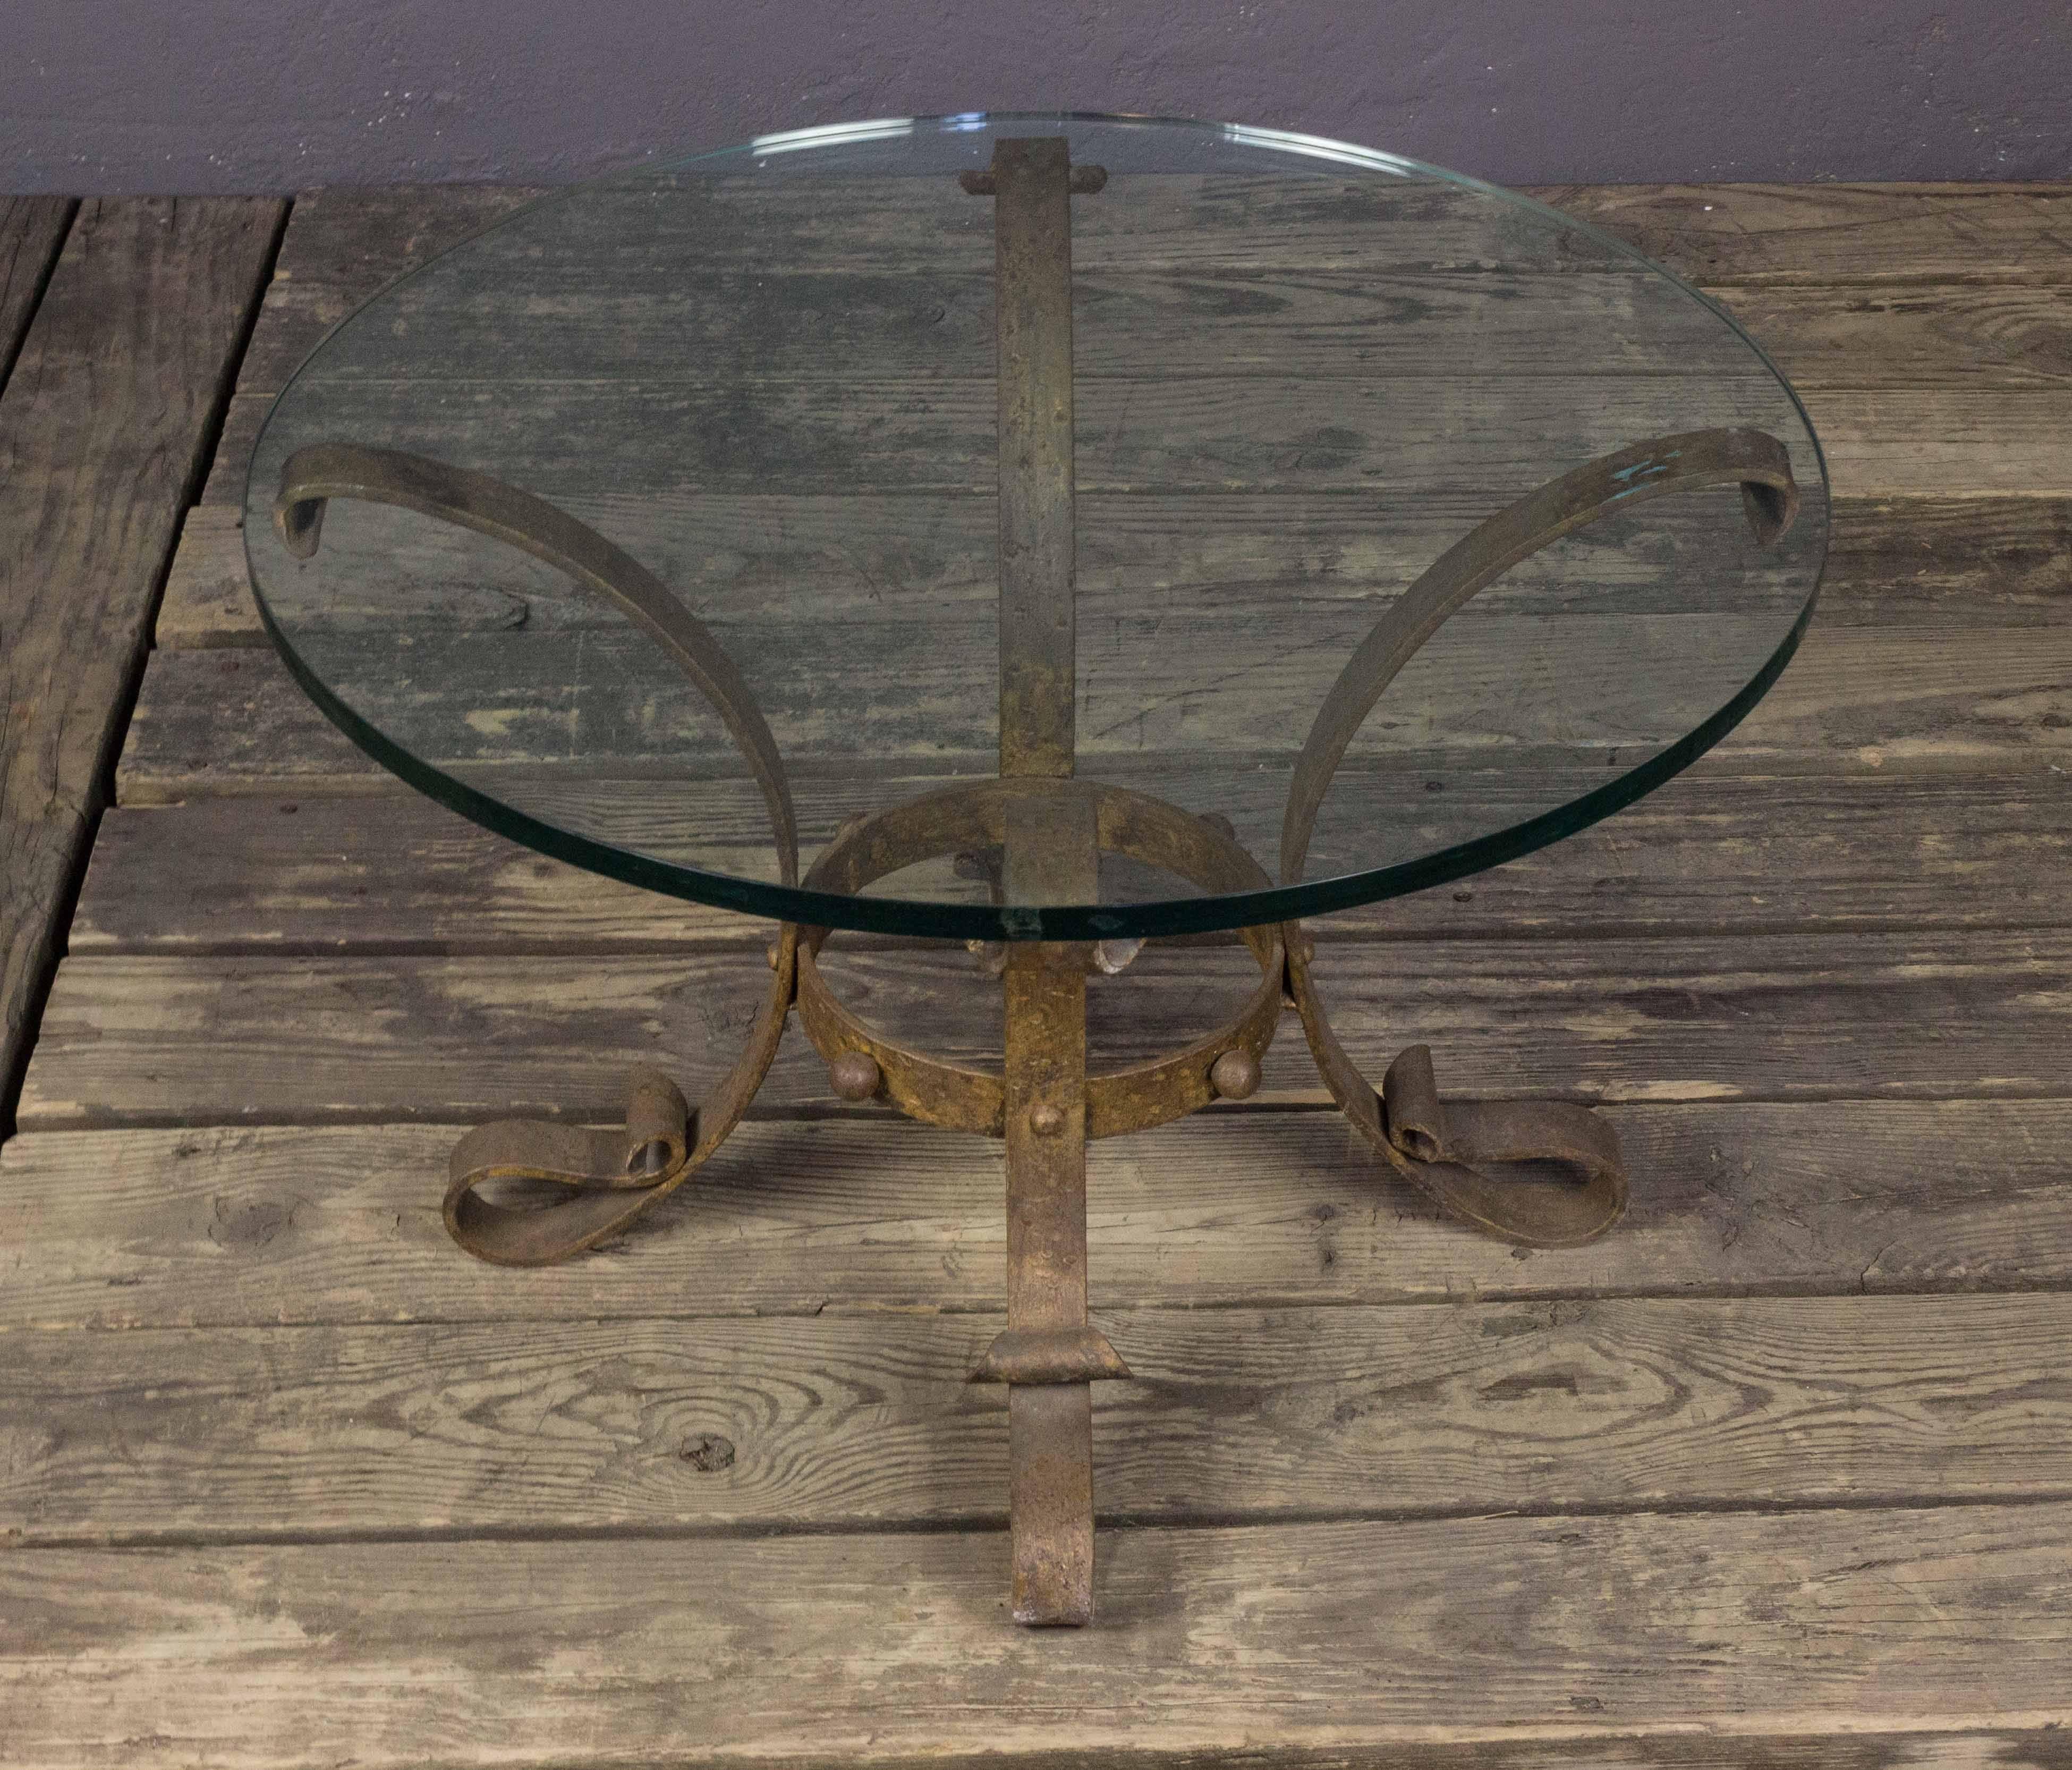 A small round gilt metal coffee table with clear glass top. The legs are scrolled and the iron work has a wonderful hand applied gilt finish. Spanish, 1950s. Good condition. Light marks to the glass.

Ref #: CT0205-01

Dimensions: 17.5